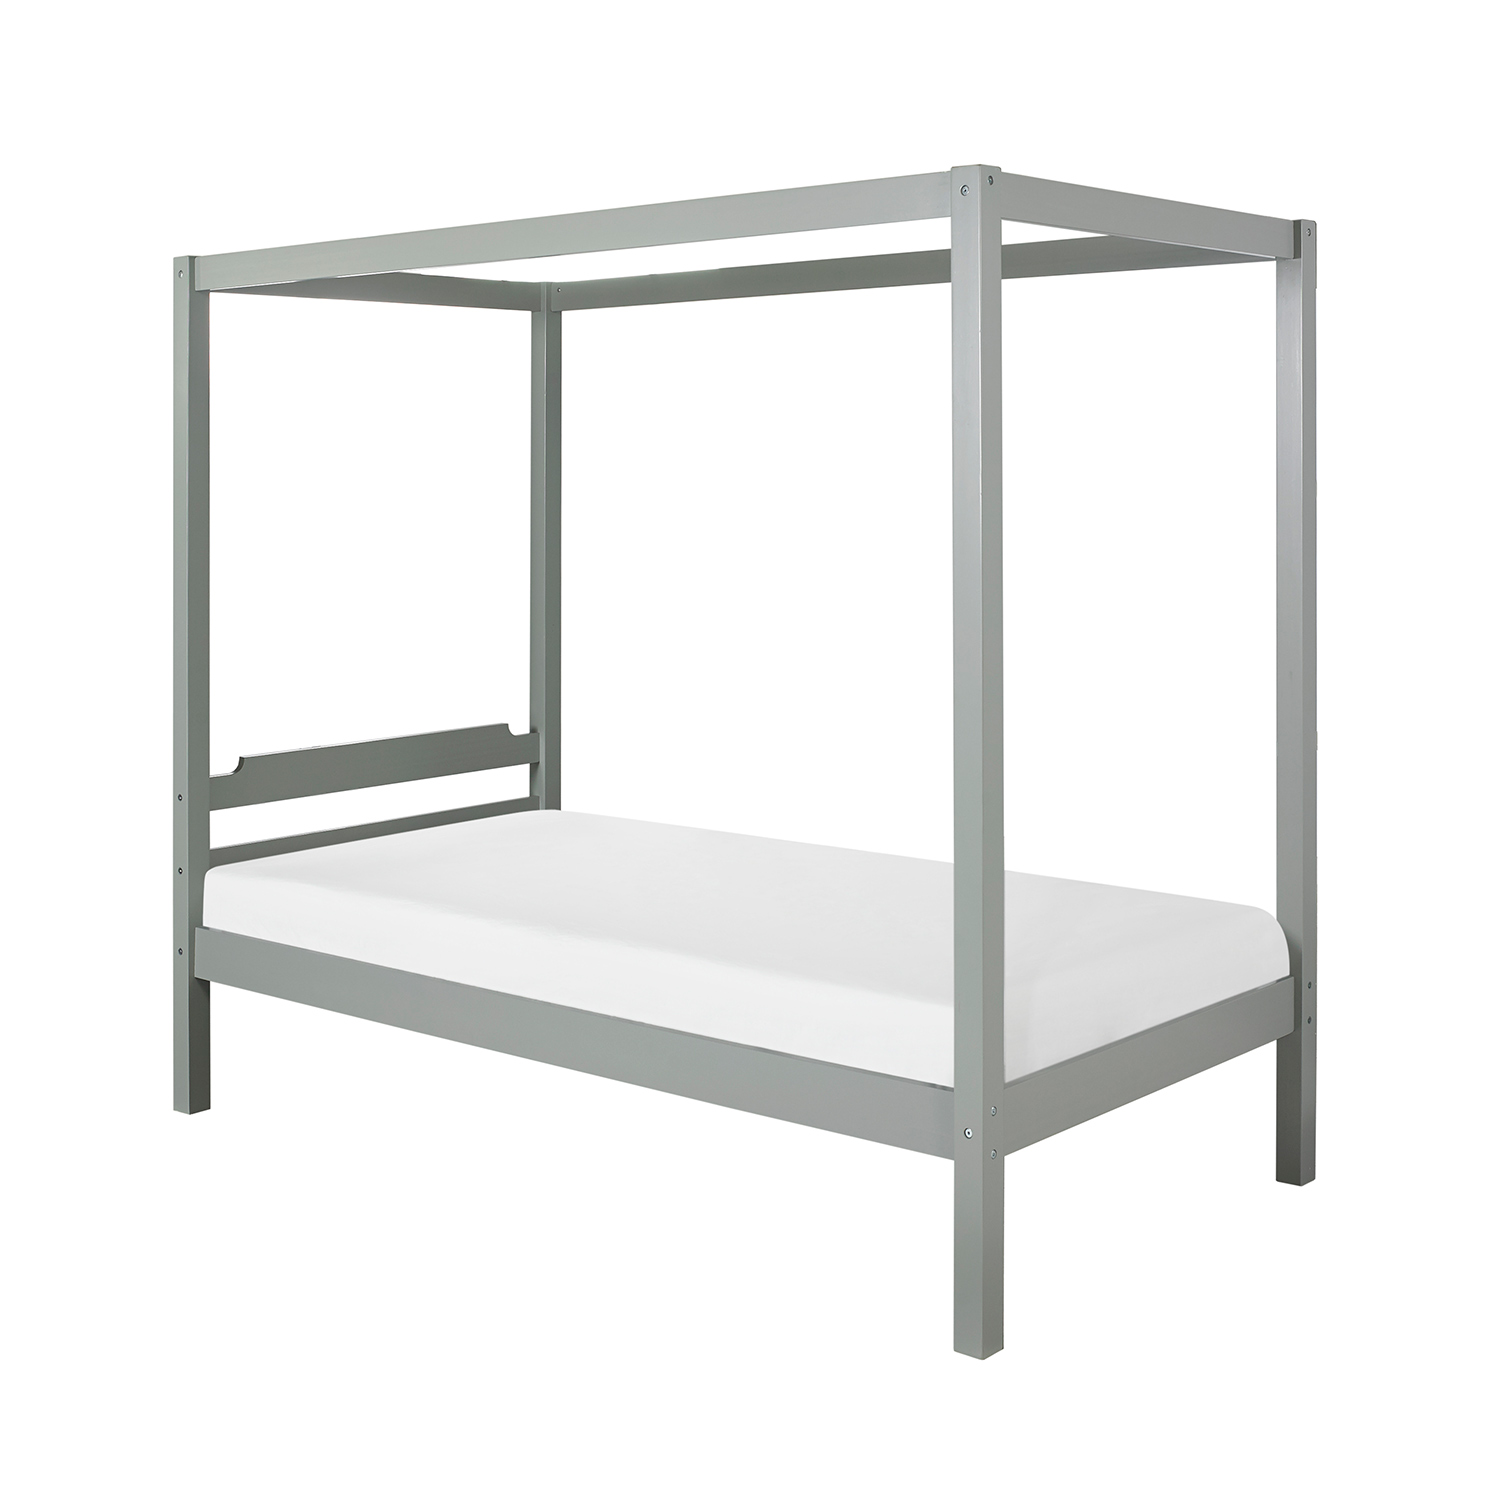 Hillsdale Sutton Wood Canopy Twin Bed - Gray